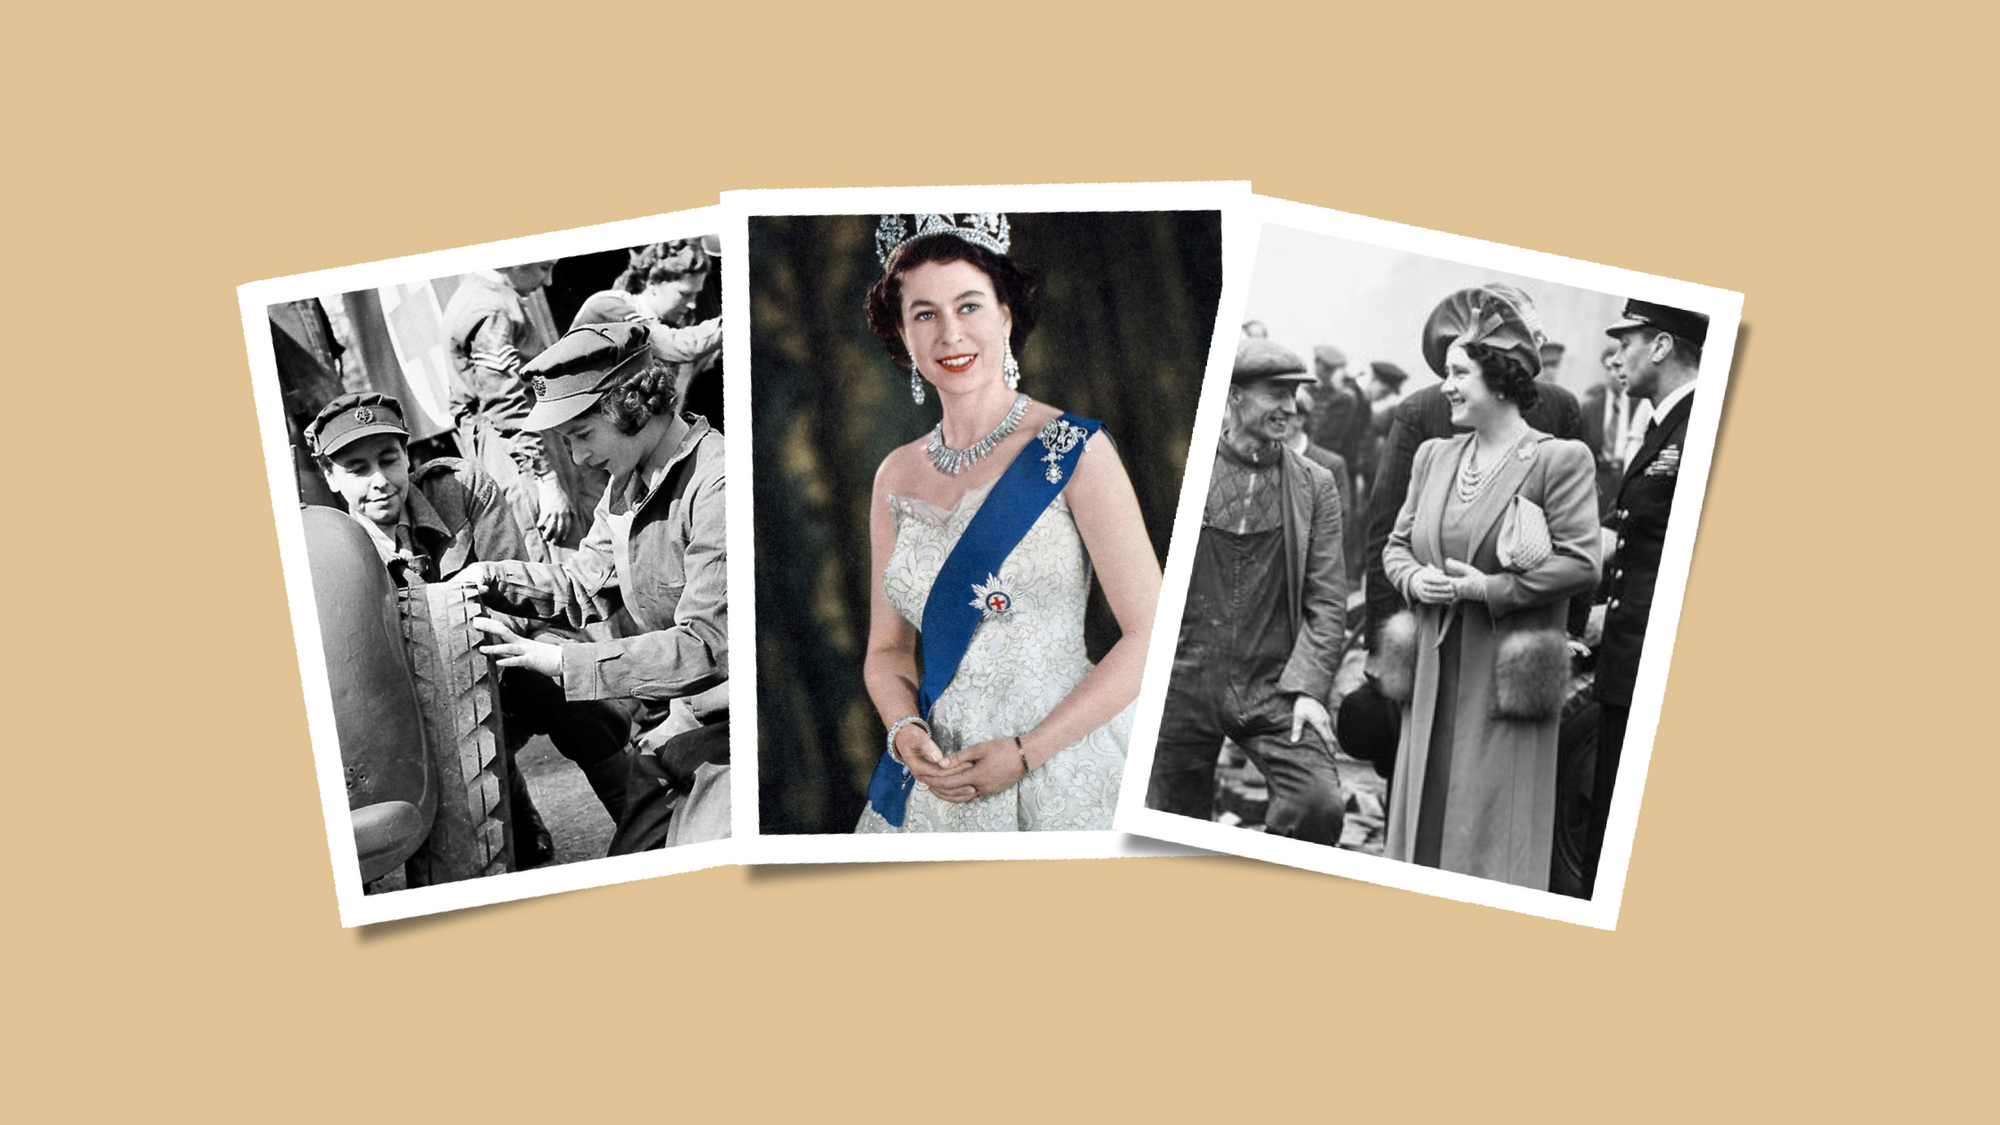 Princess Auto Mechanic: Celebrating the Platinum Jubilee and The Queen's Role in WW2